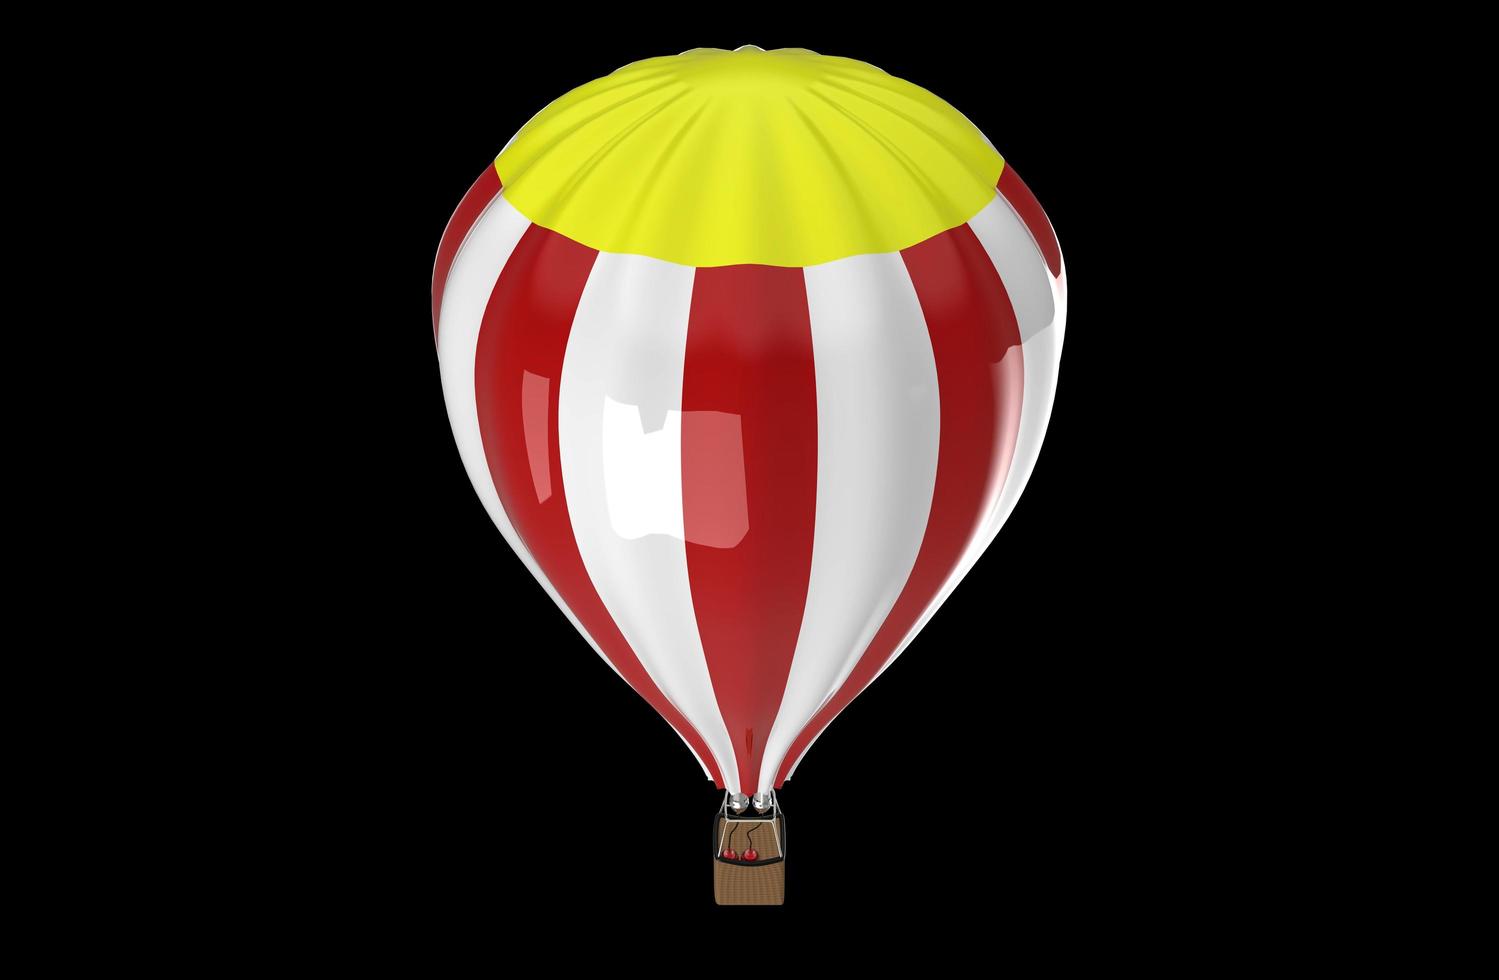 Hot air balloon isolated on white background 3d image illustration photo